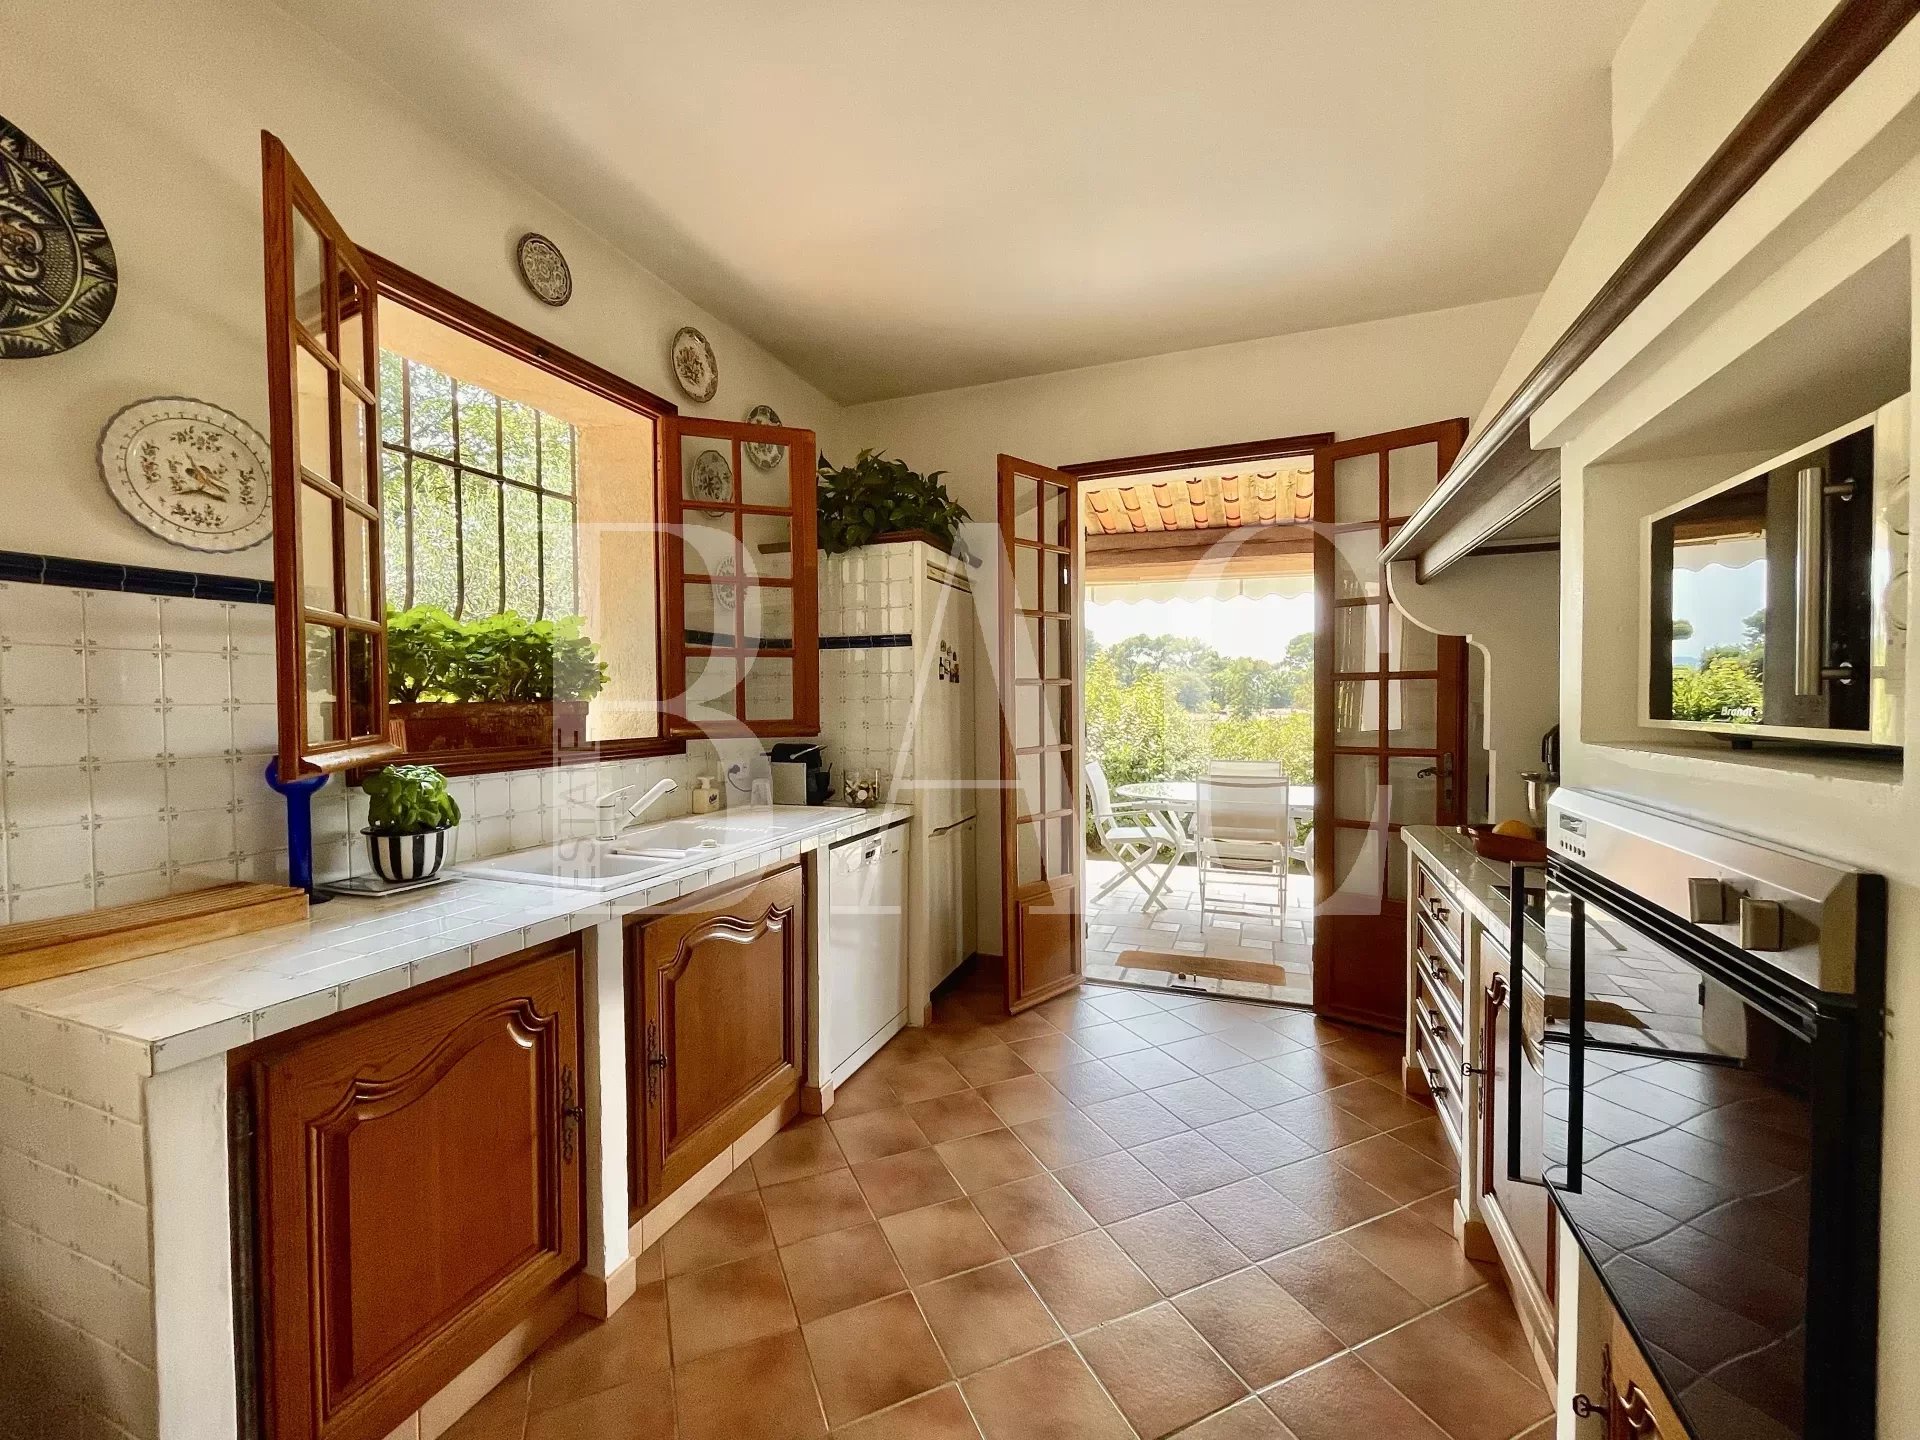 Mougins, villa with panoramic view of nature